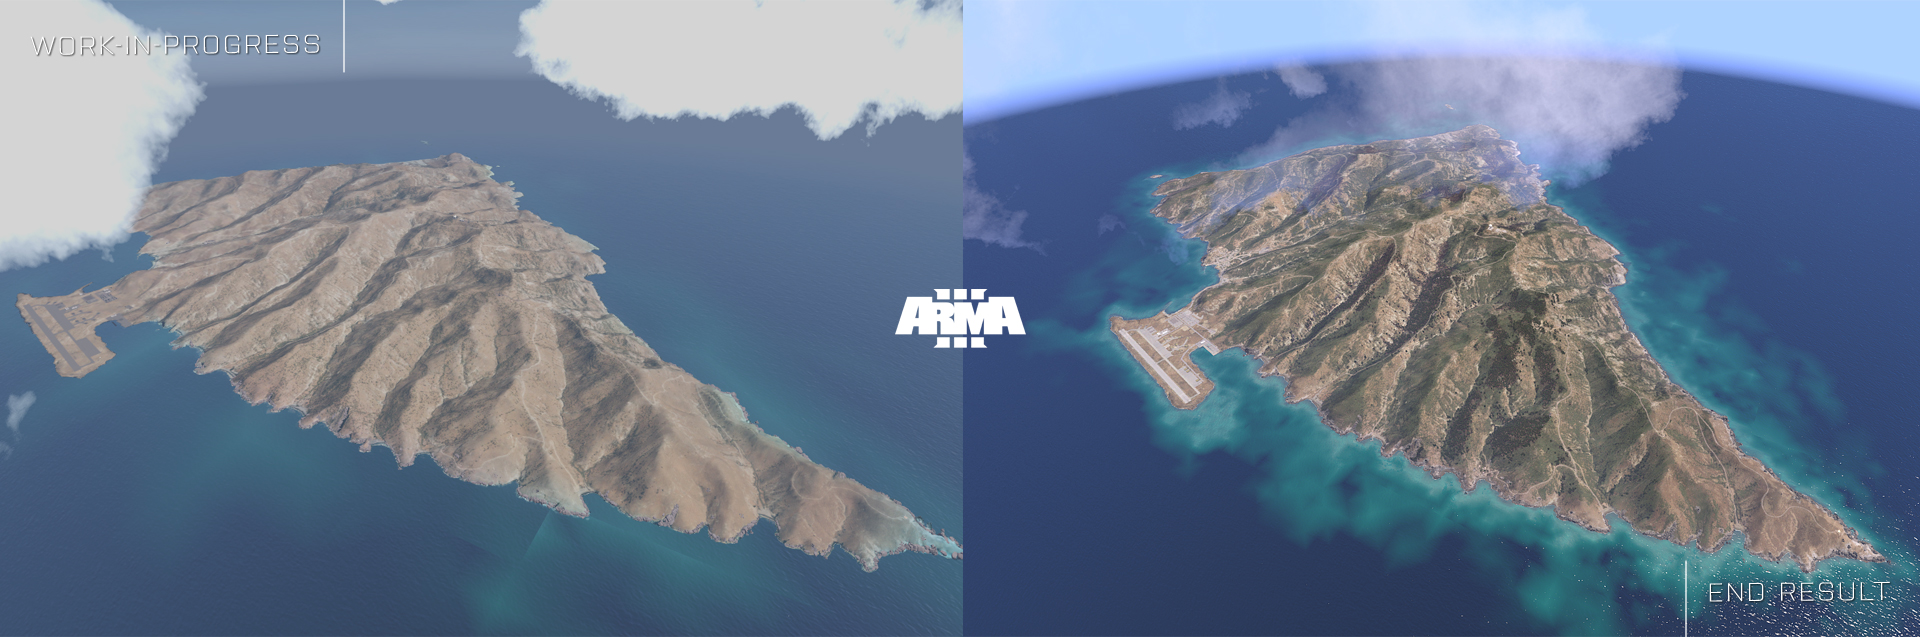 largest arma 3 map